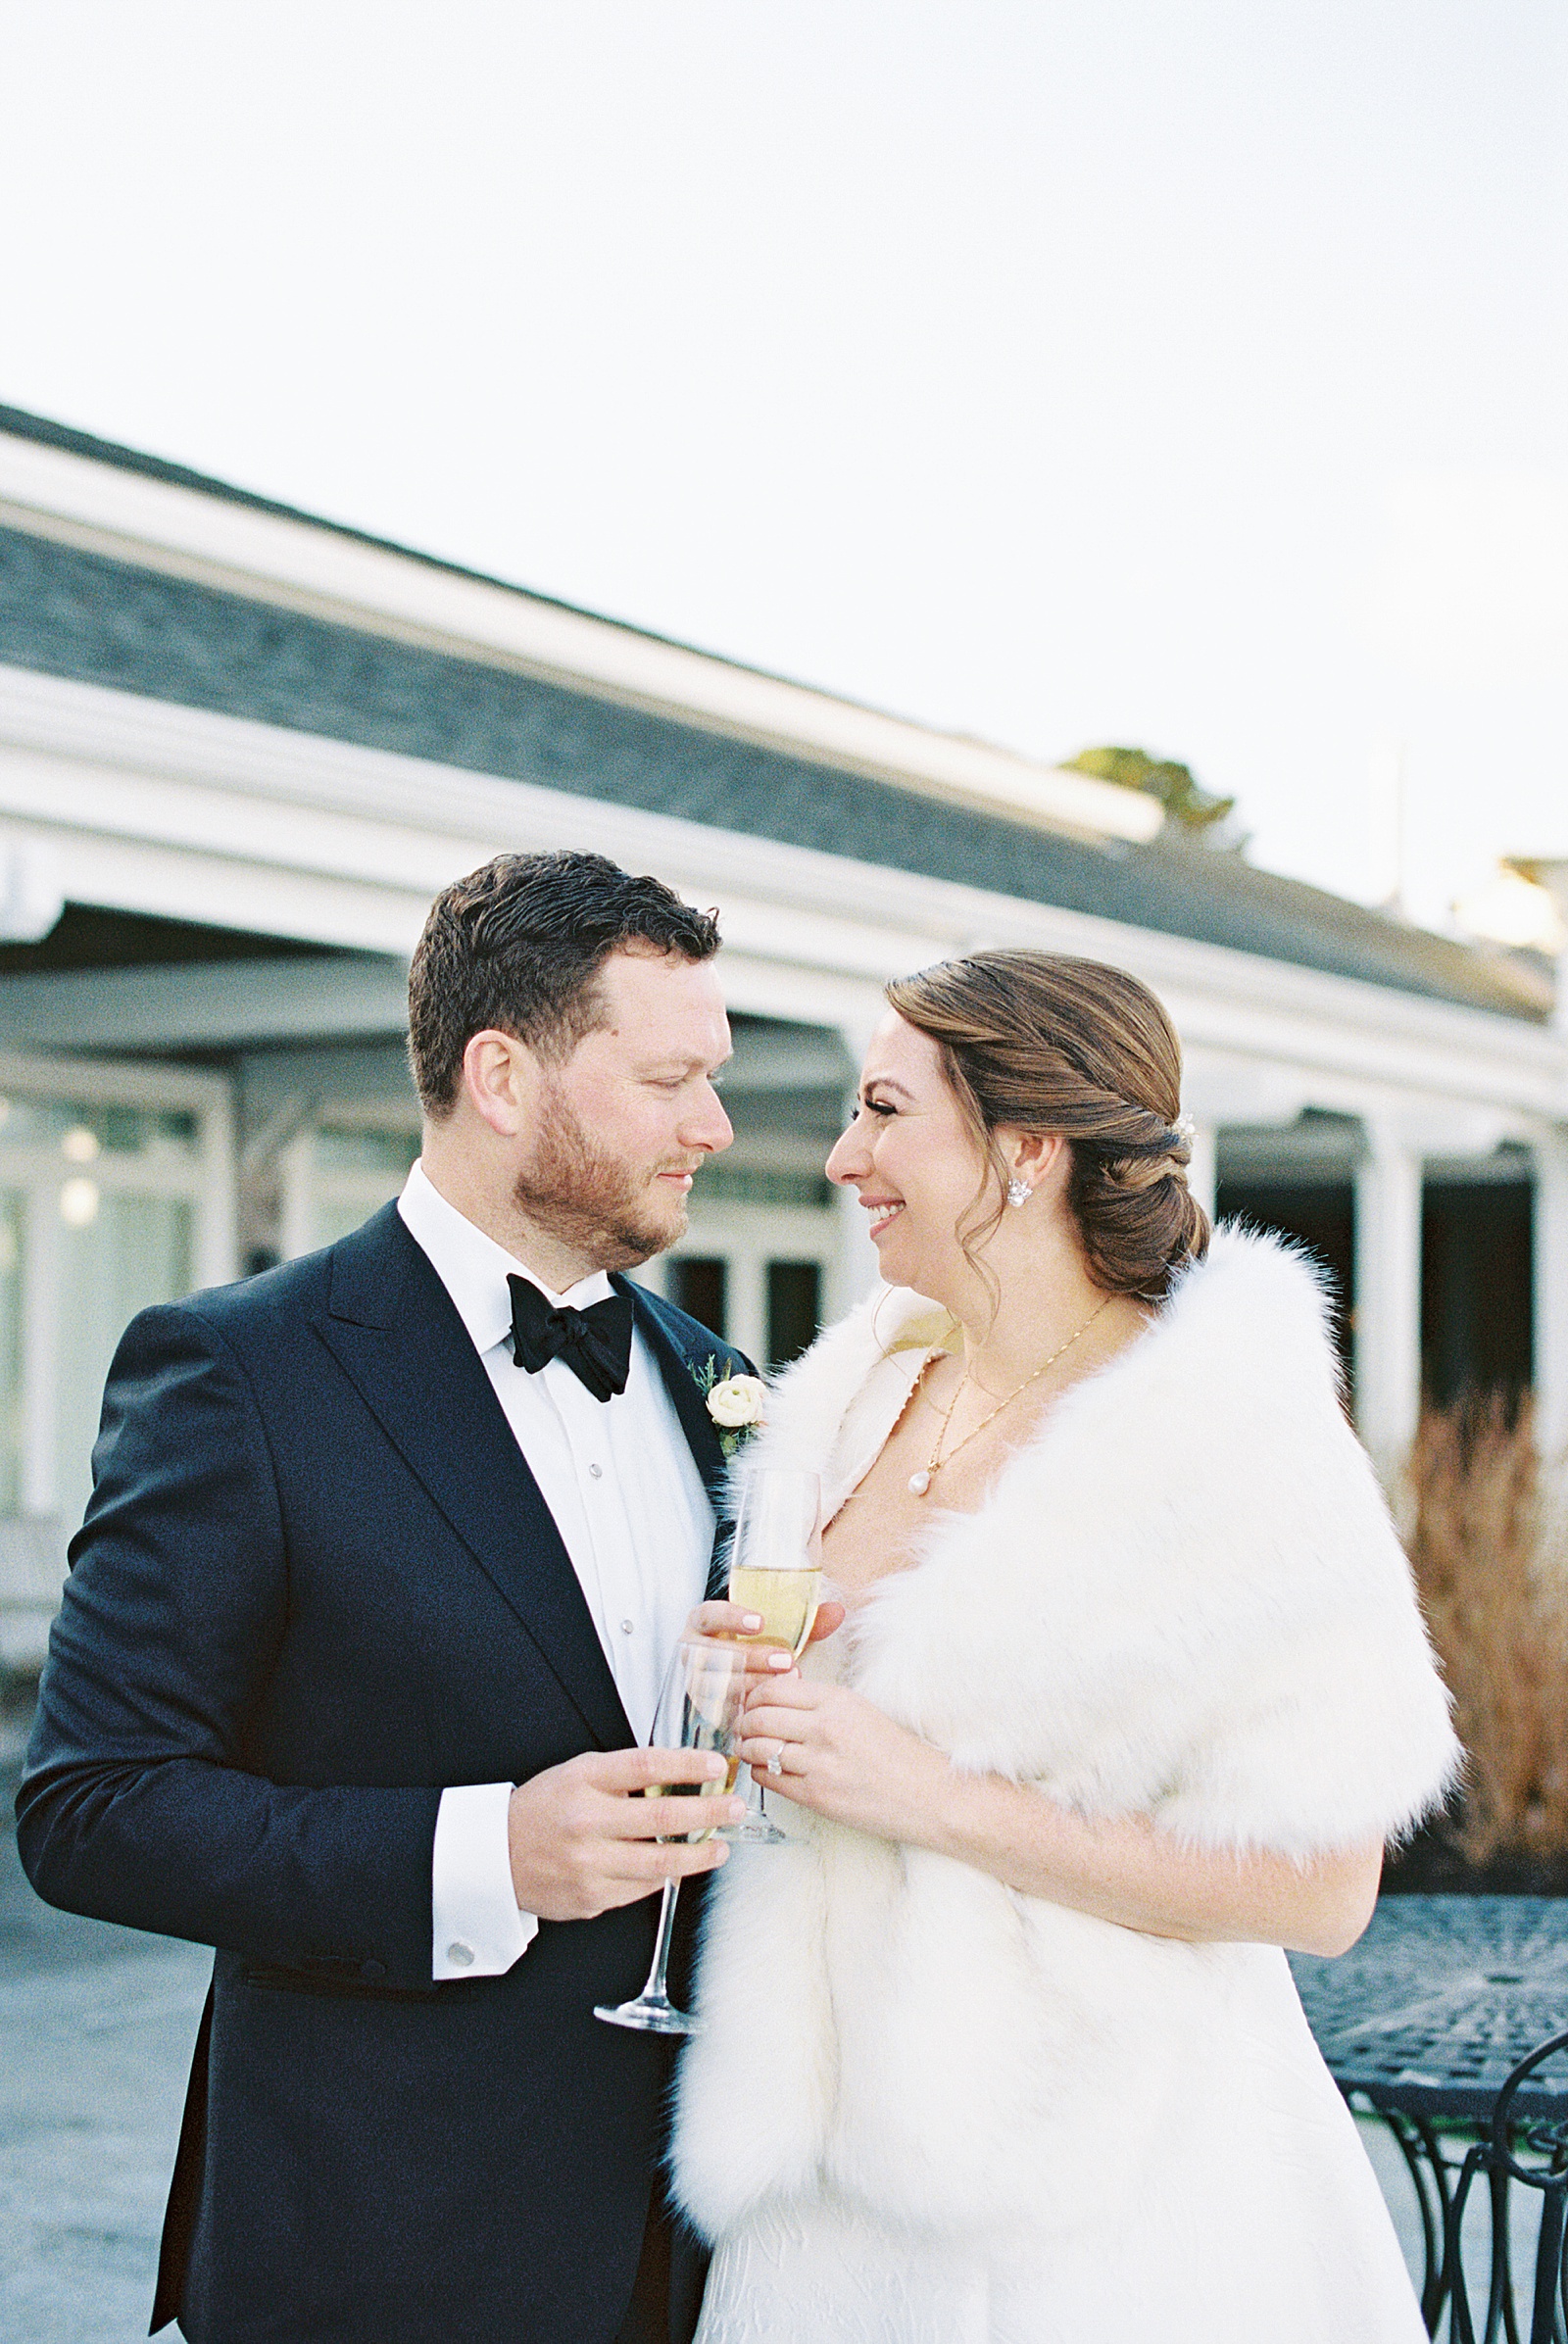 A bride and groom raising a toast before their ceremony 